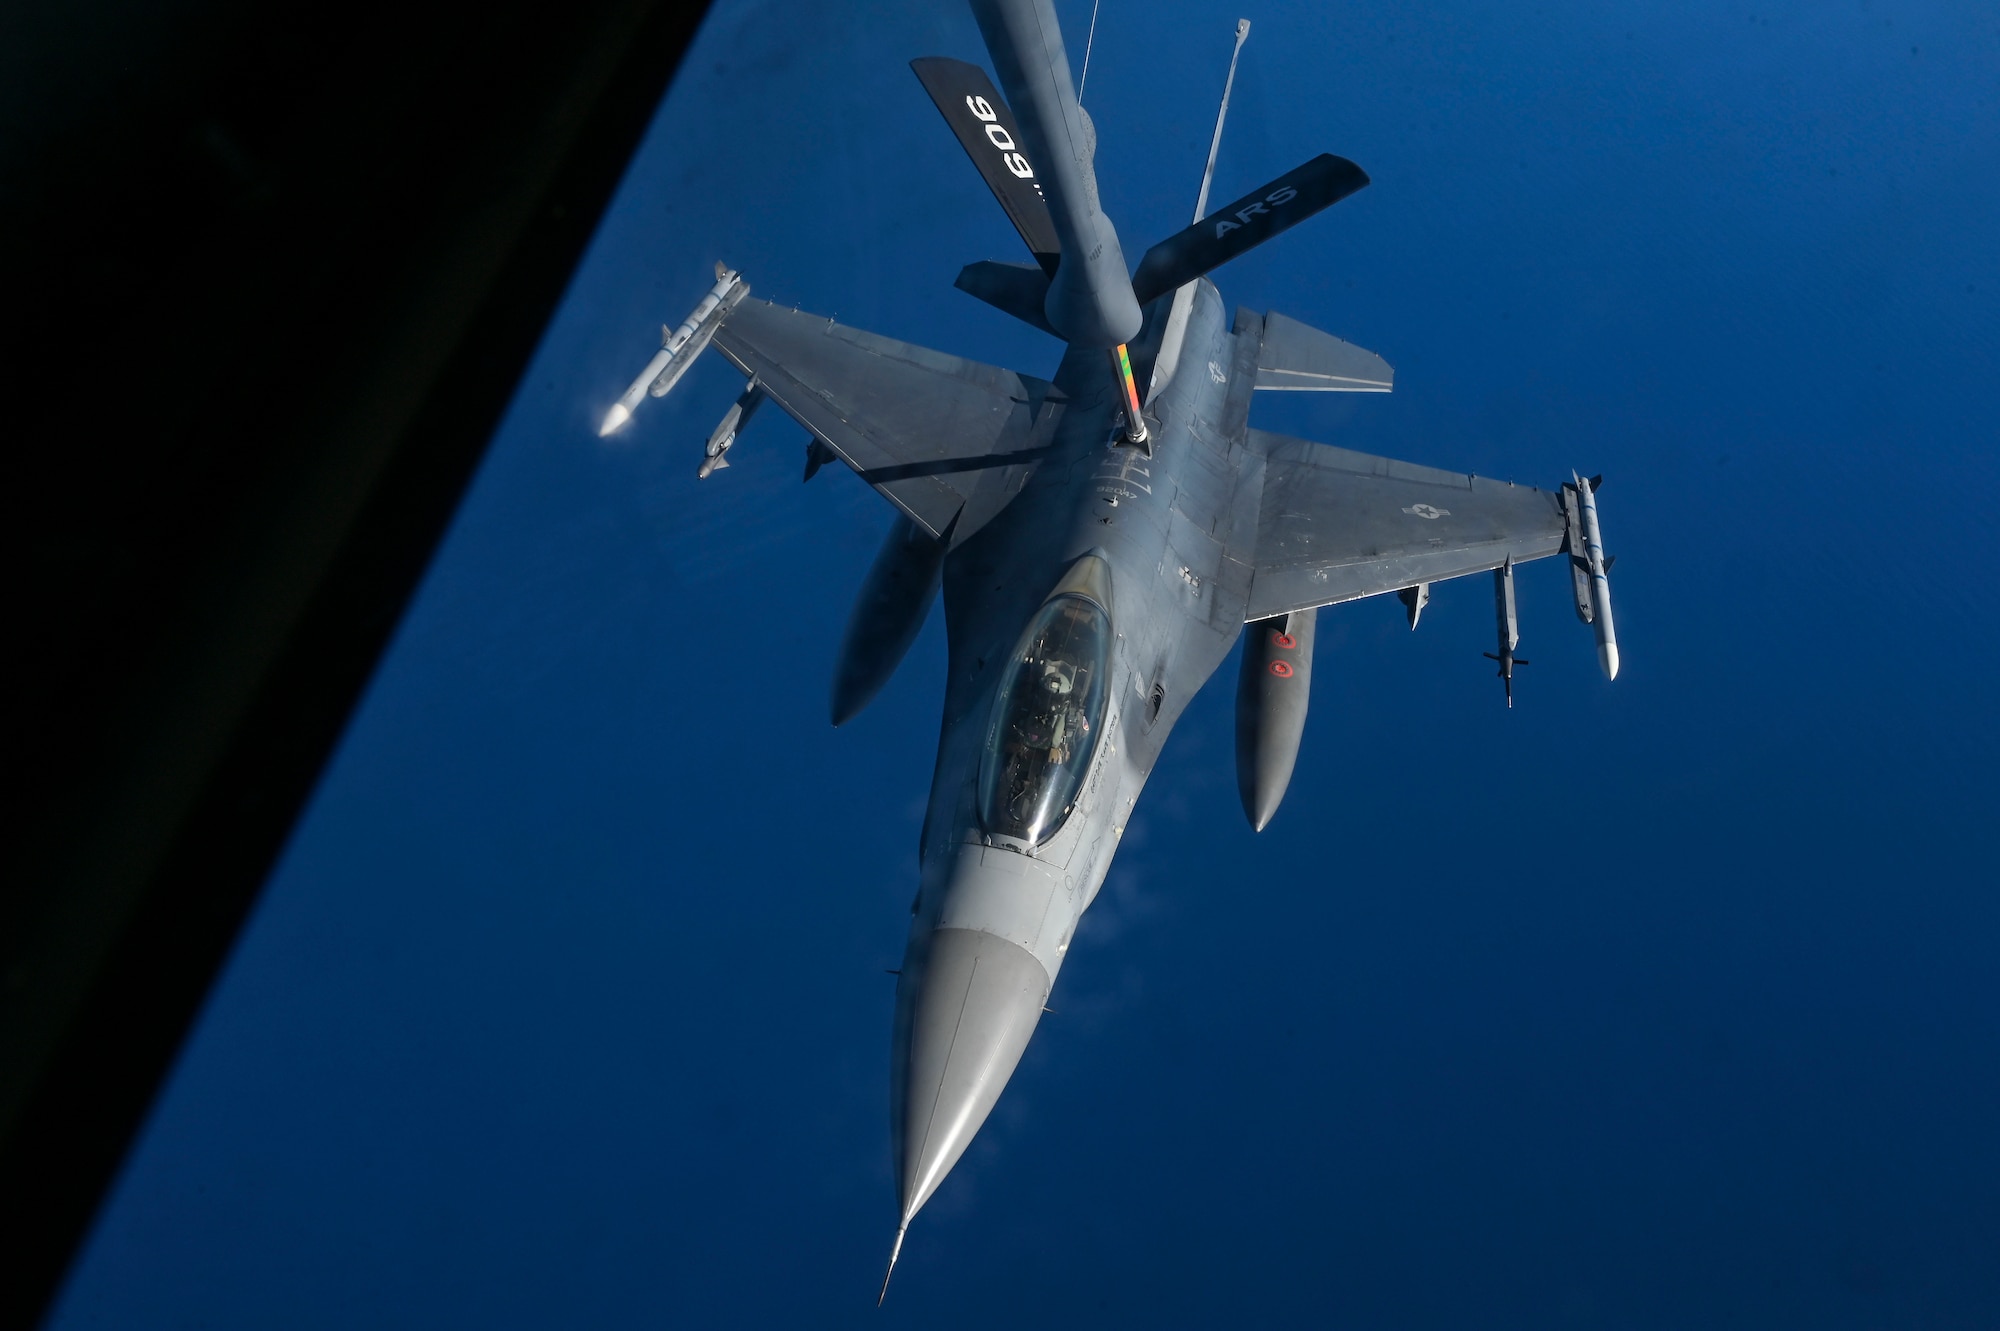 An F-16 fighter jet receives aerial refueling